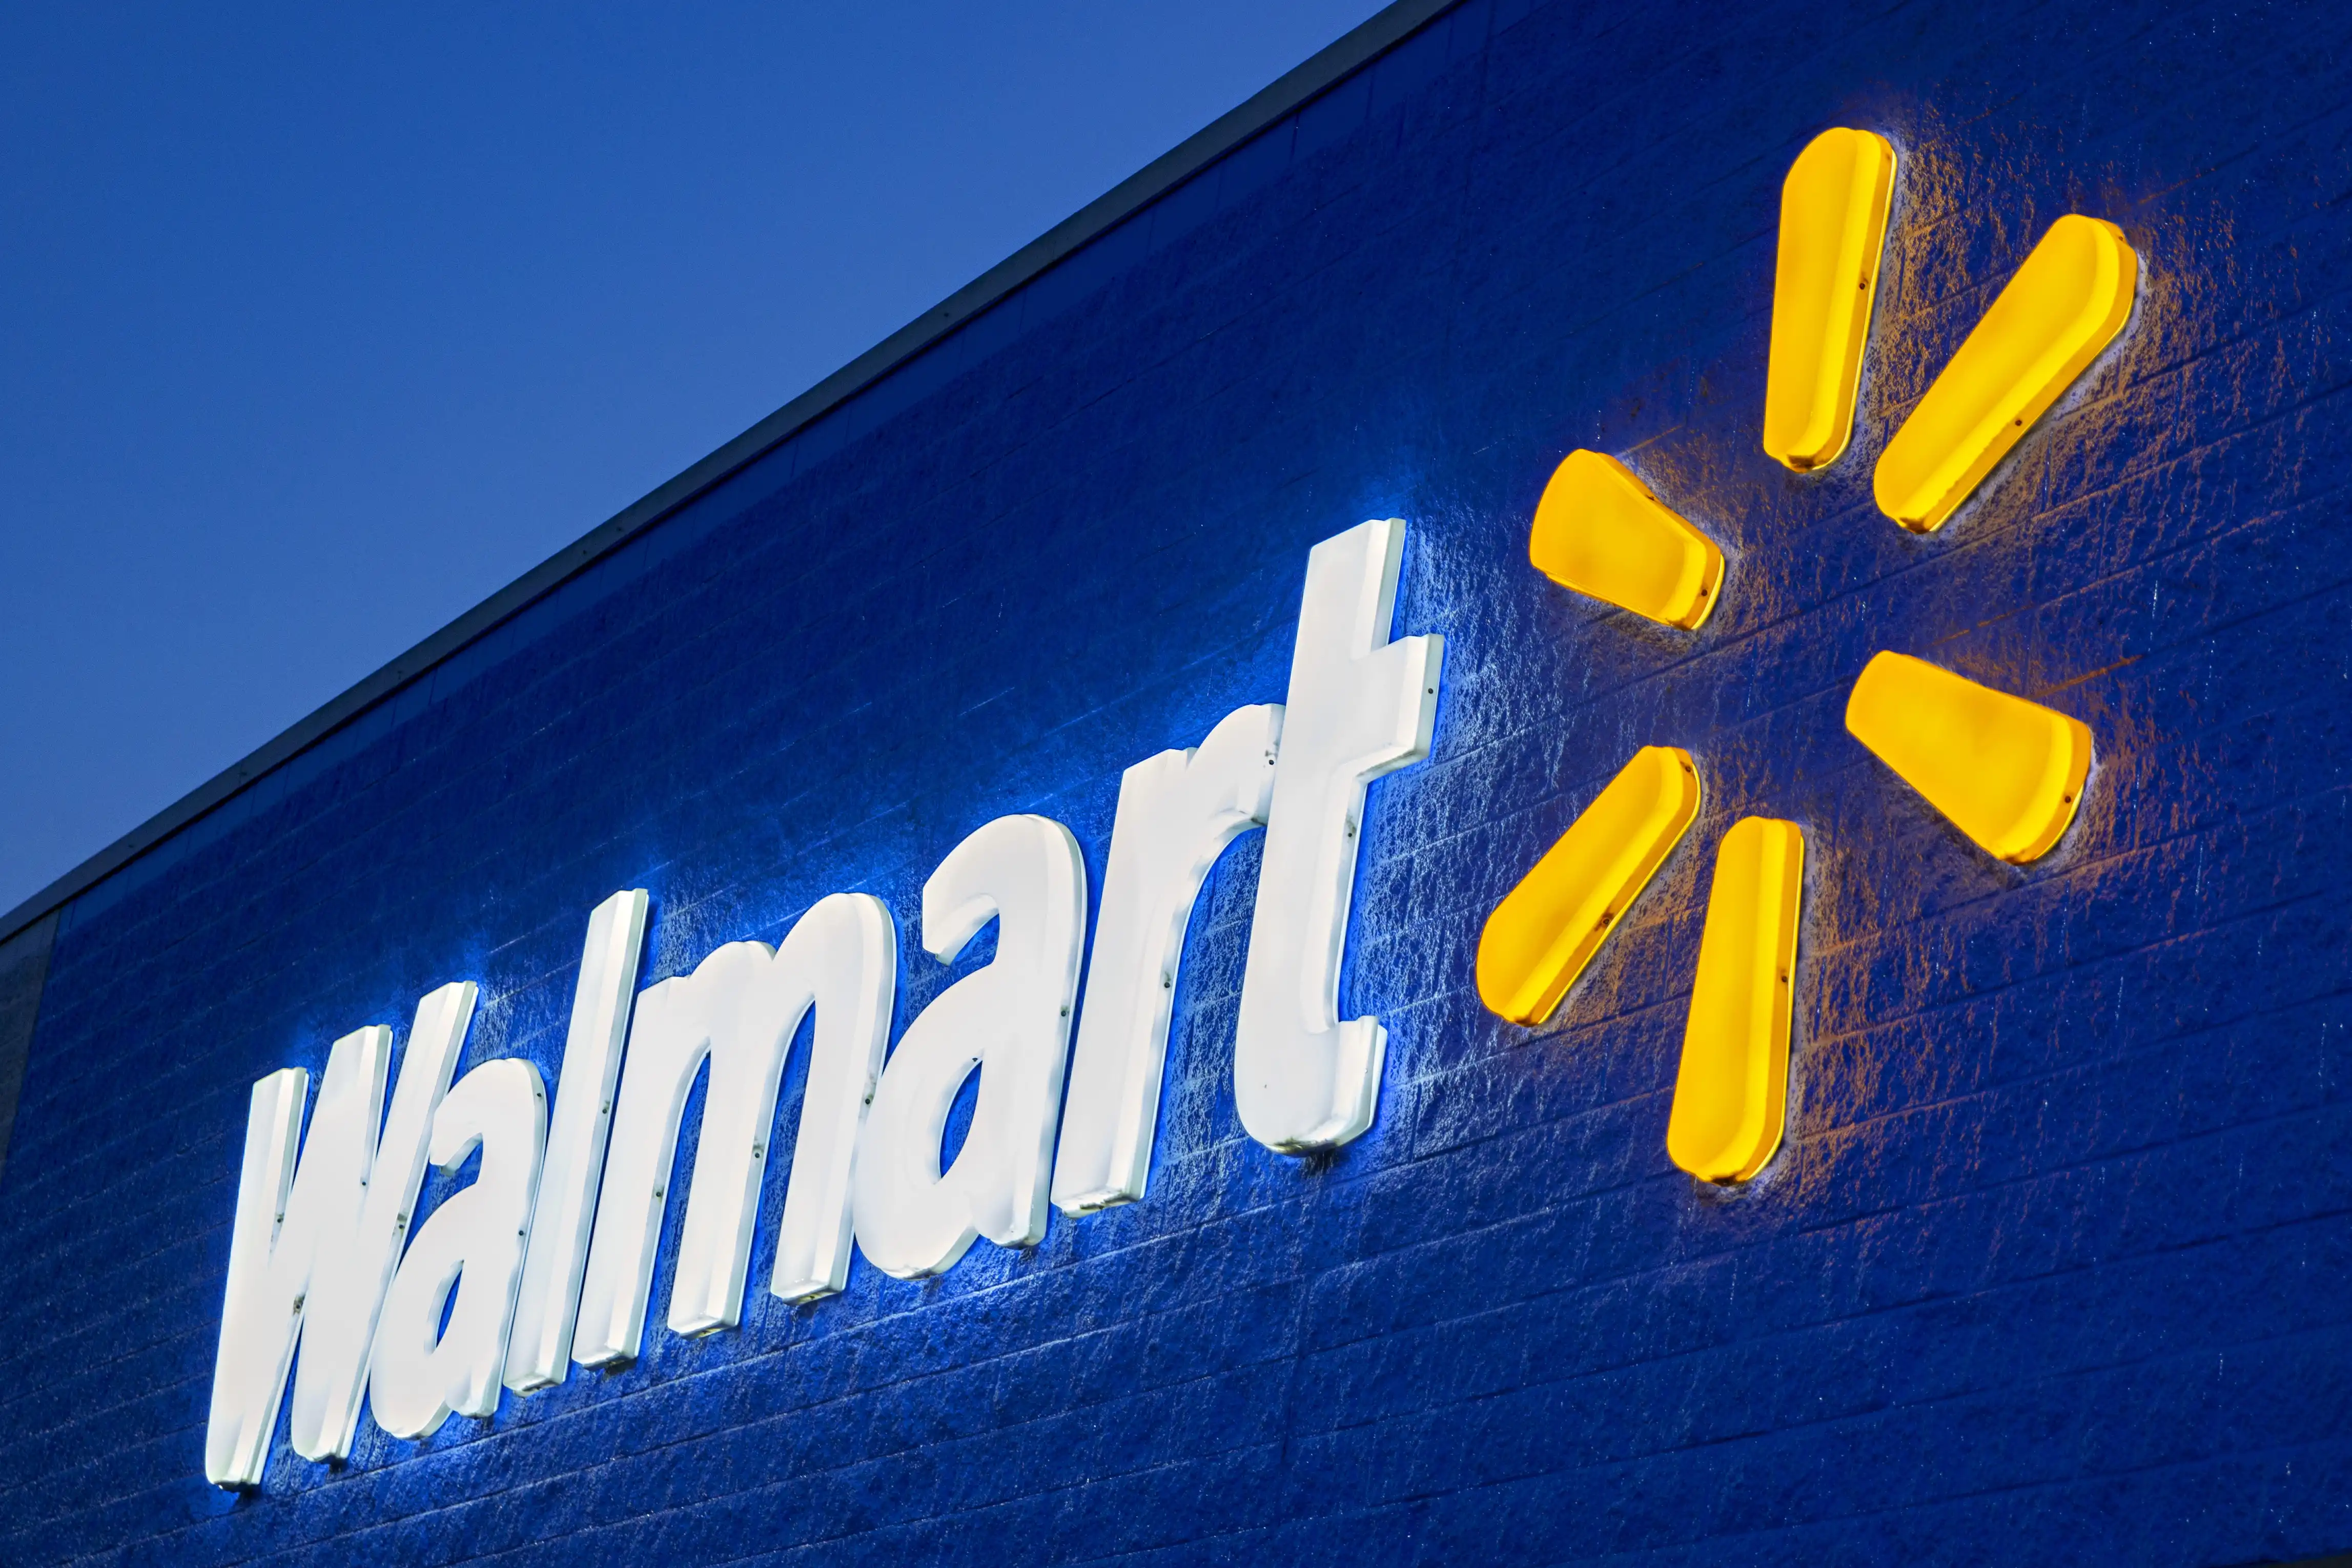 Walmart Stock Surges on Positive News from The Motley Fool